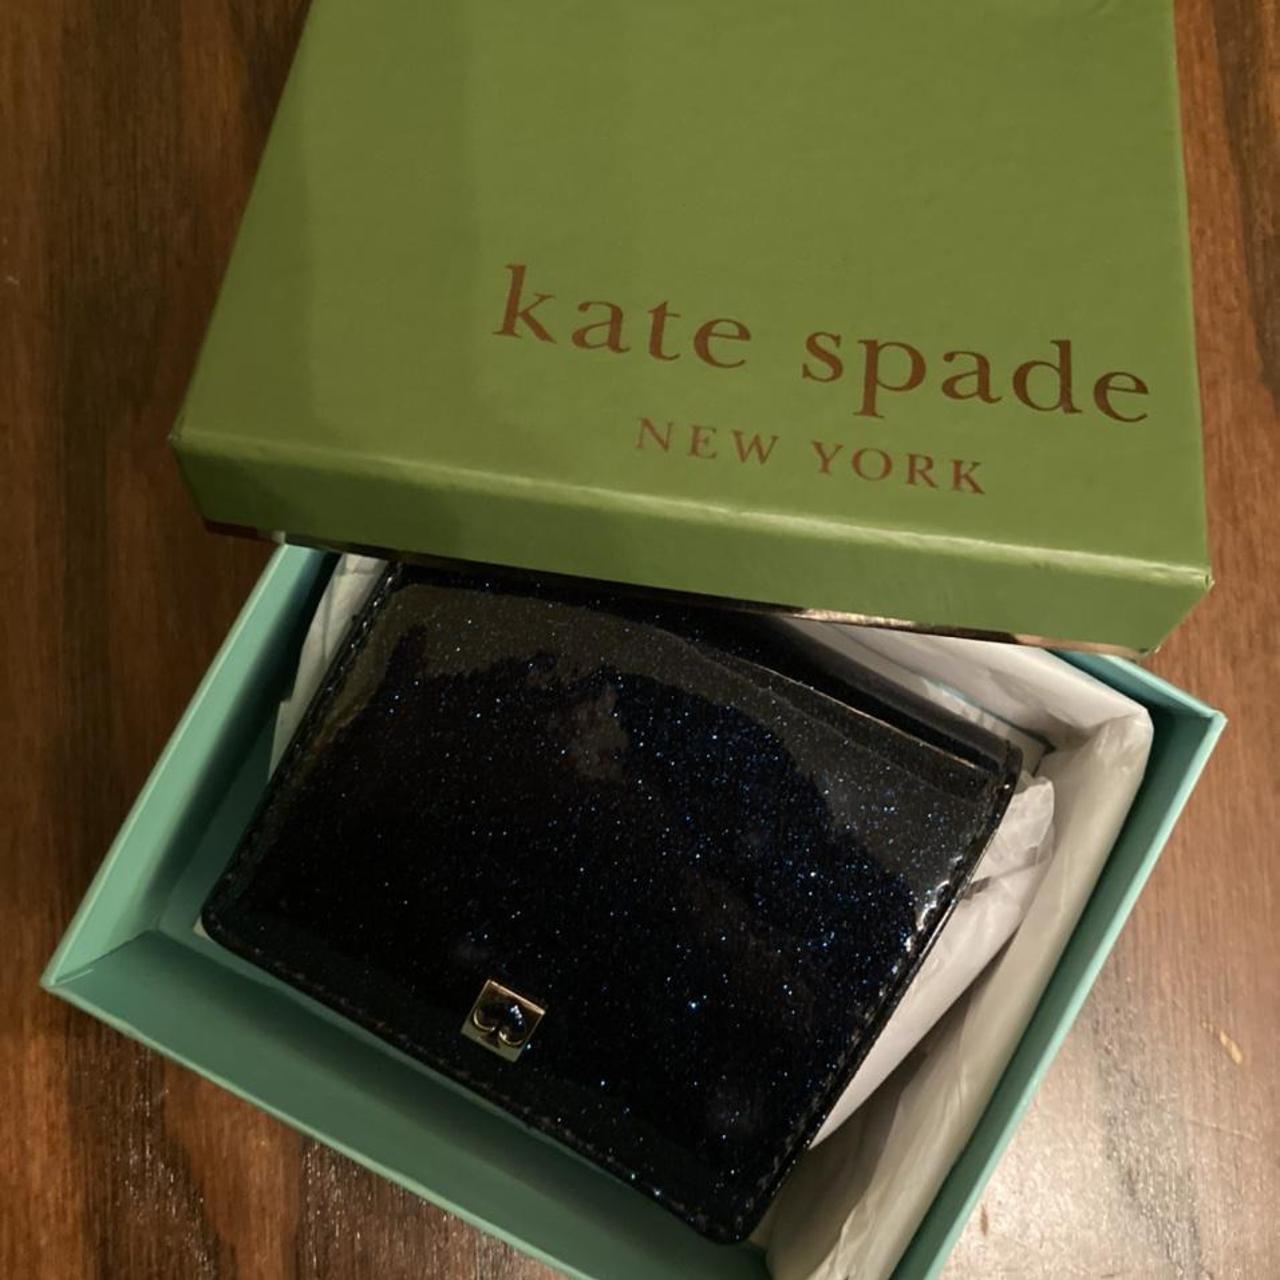 Product Image 1 - Brand new Kate Spade sparkly